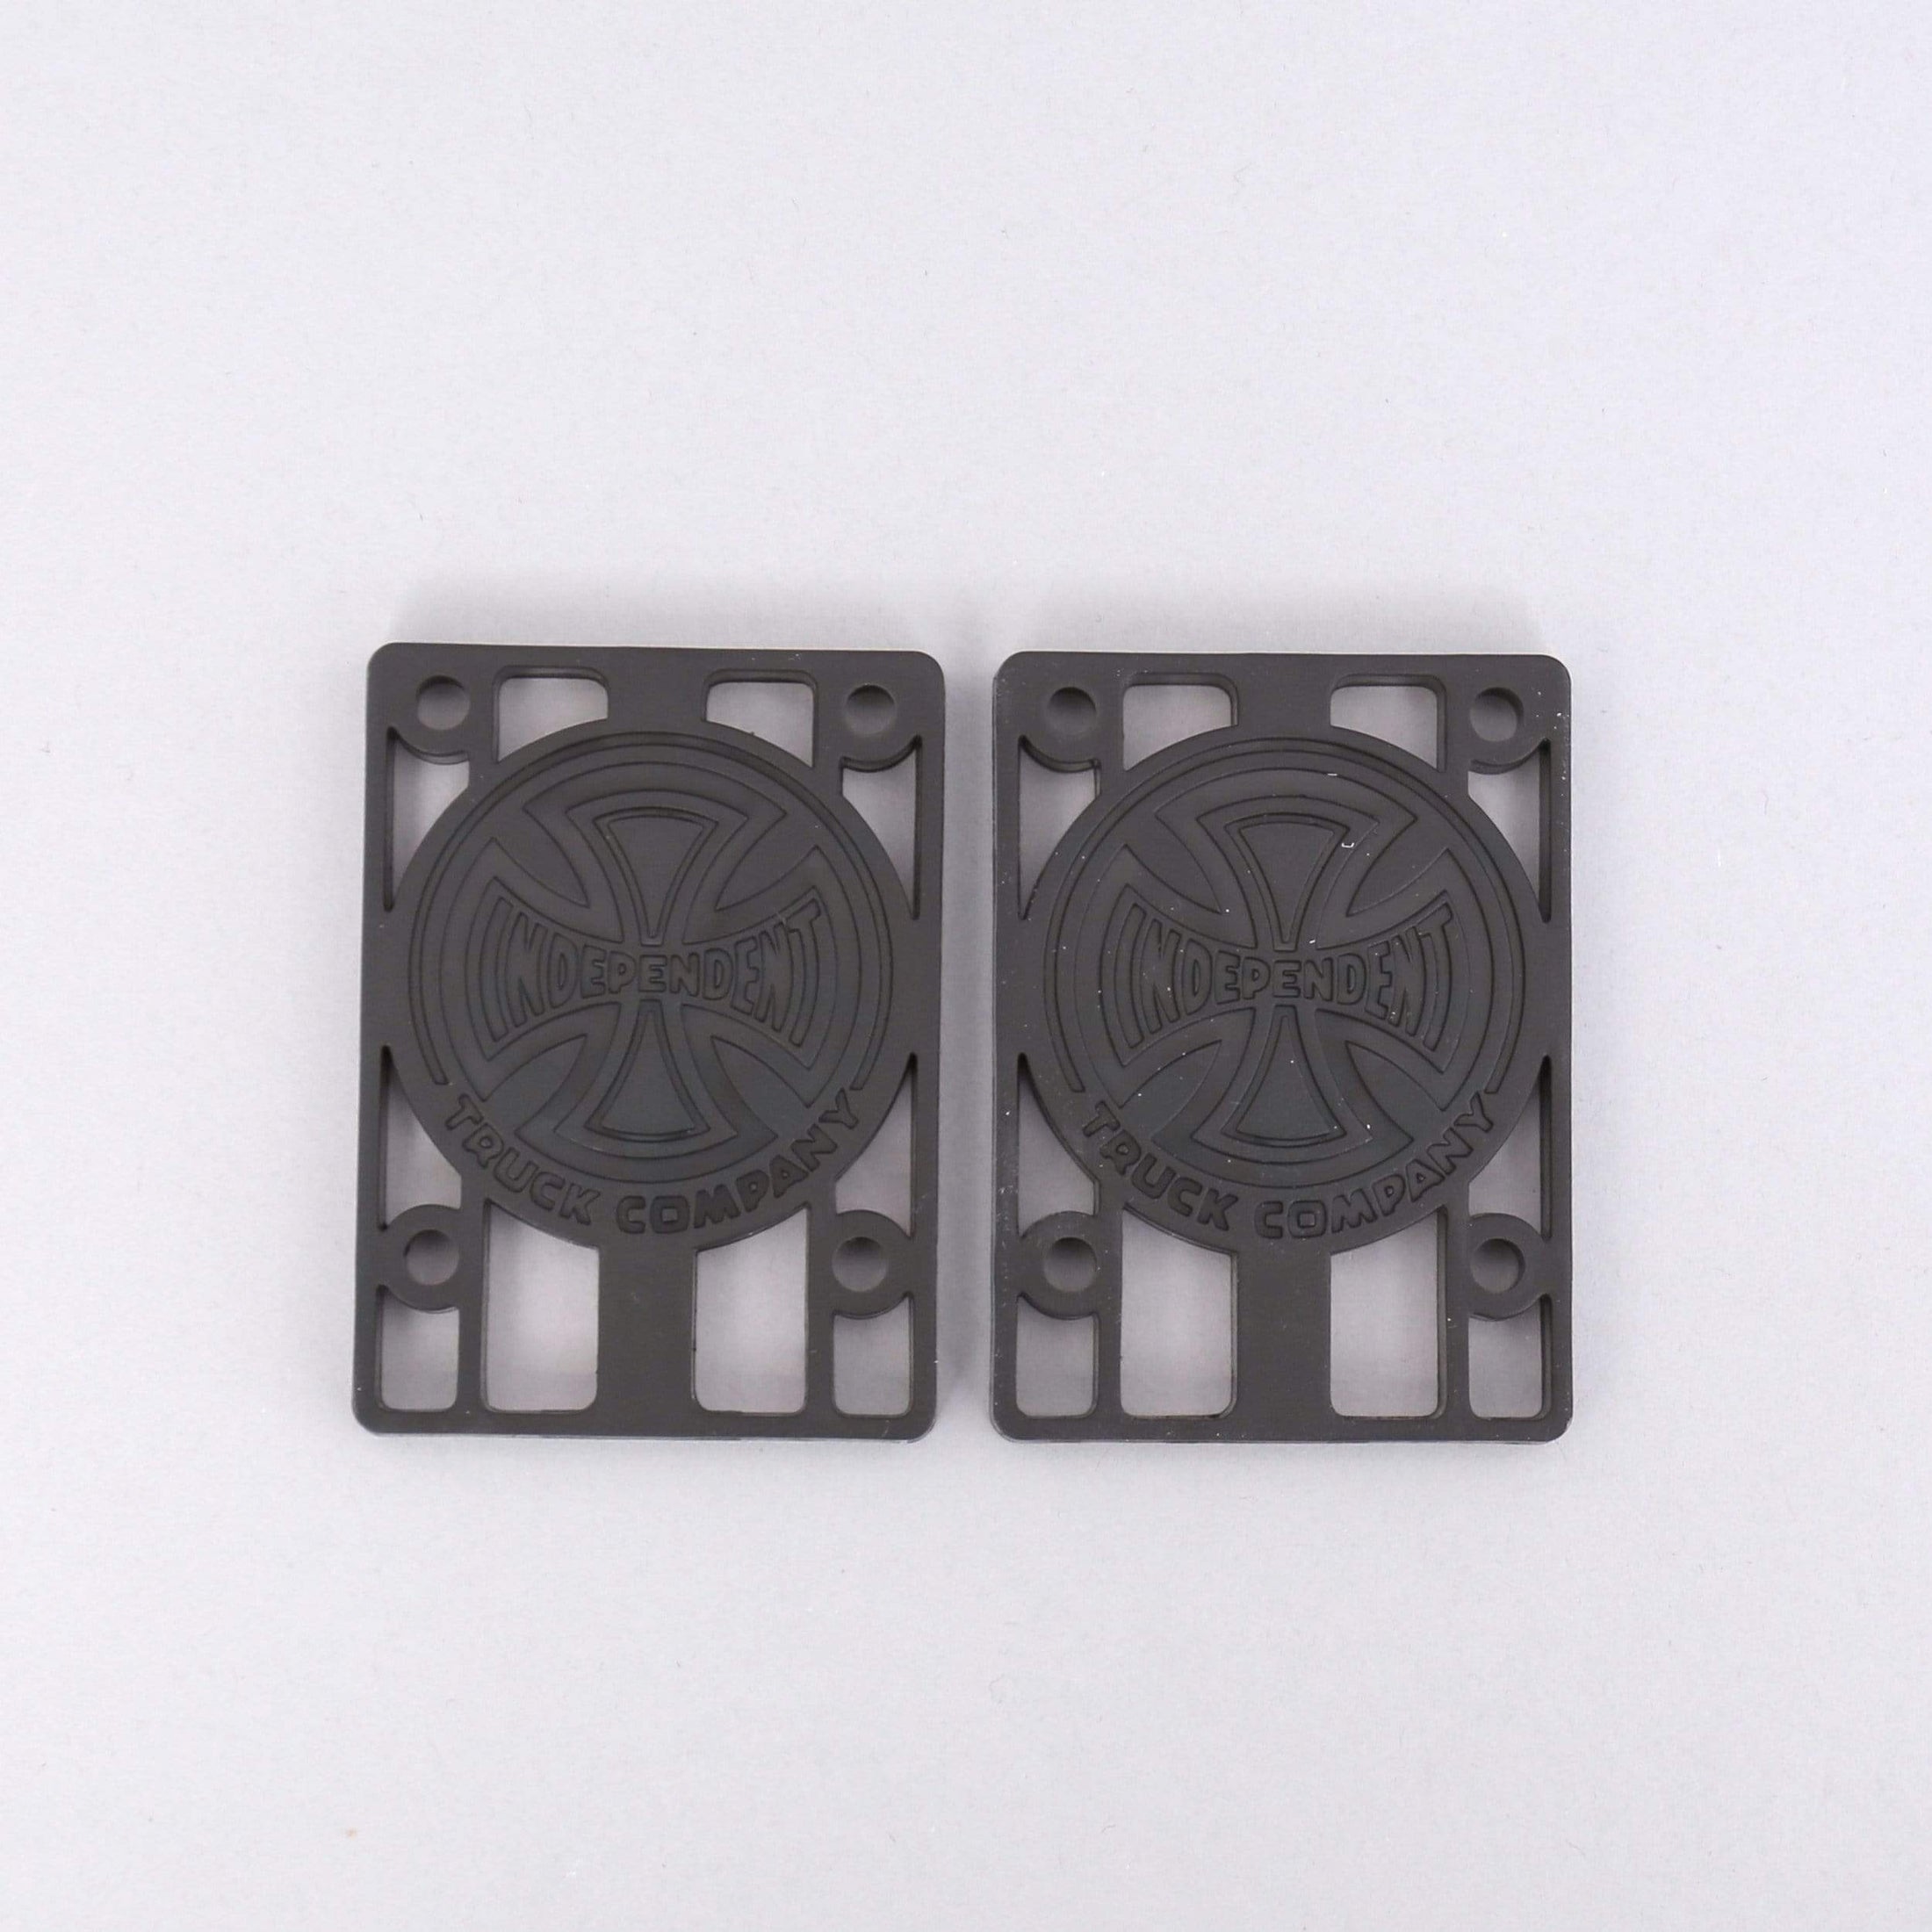 Independent 1/4 inch Risers (pack of 2) Black